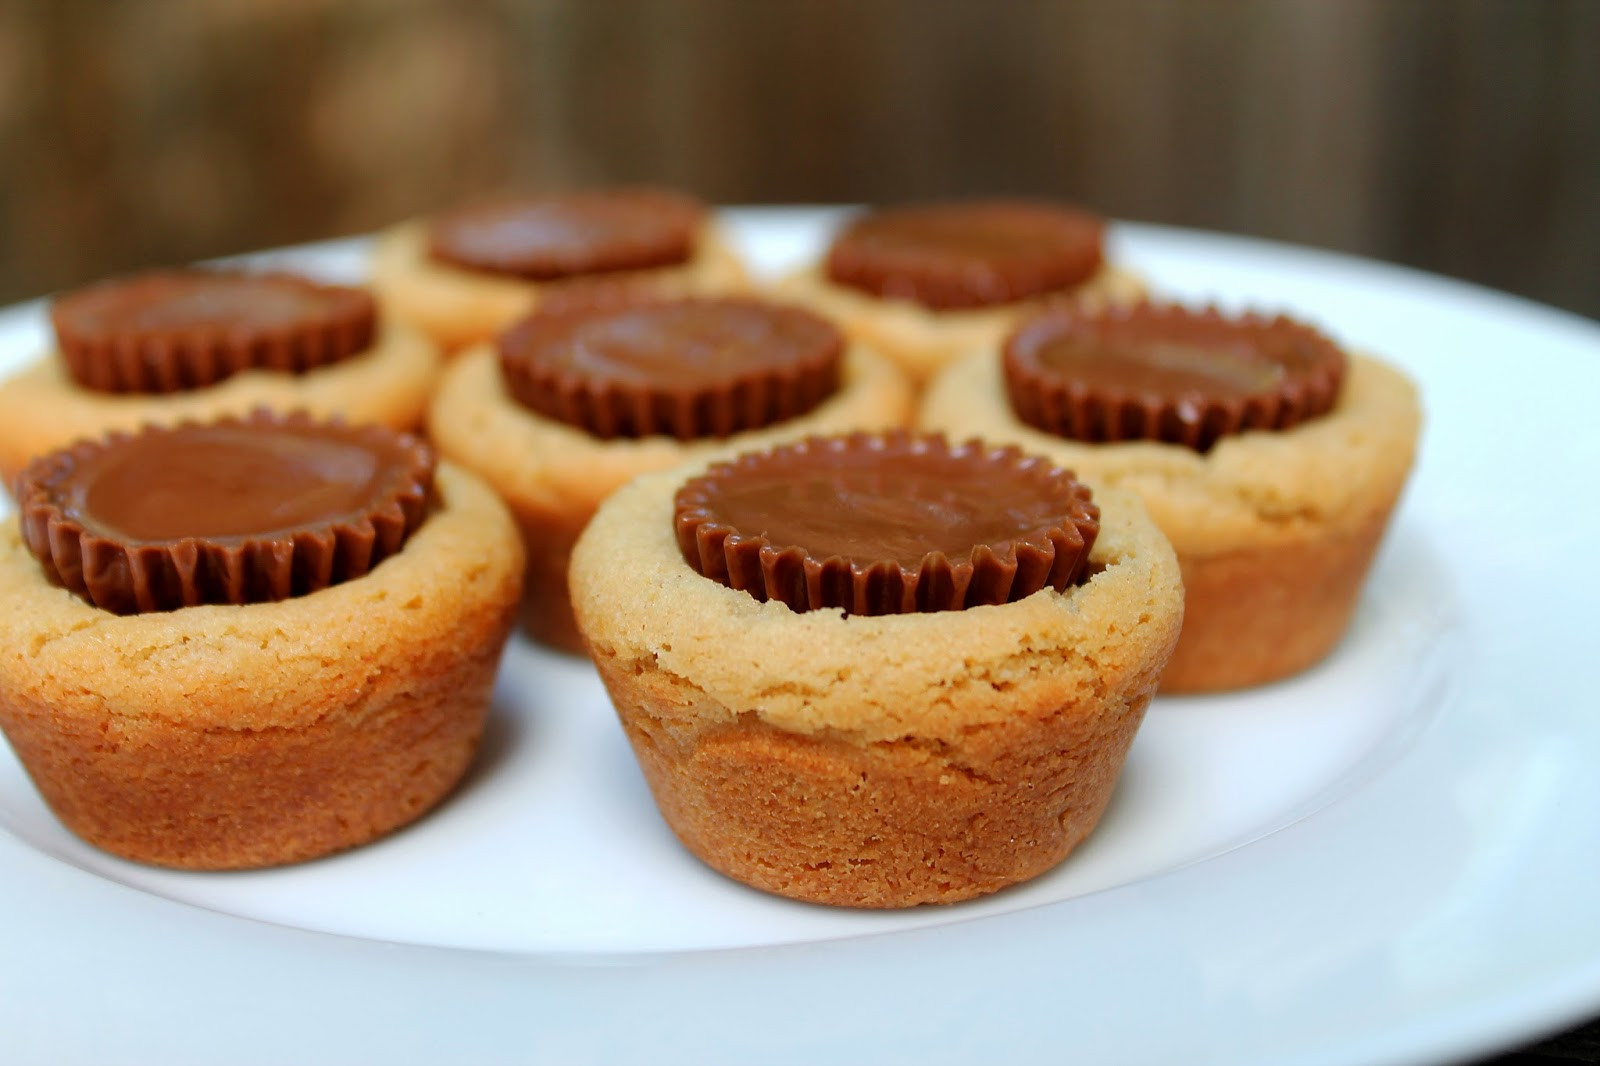 Reese Peanut Butter Cup Cookies Recipe
 The Dinner Club Reese s Peanut Butter Cup Cookies